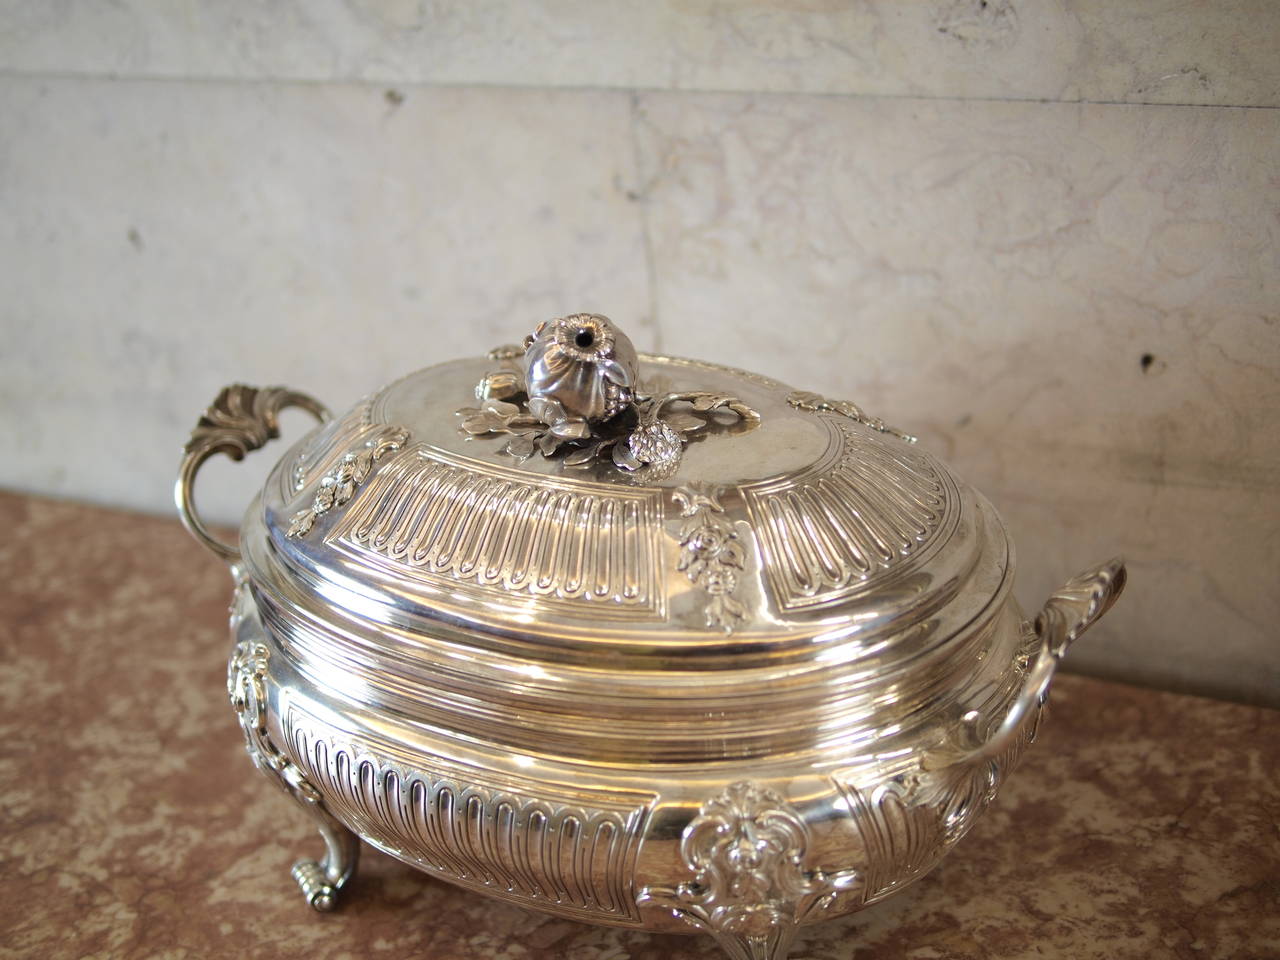 D. José silver tureen clearly french influenced with relief and grooved work
In the interior a silver tray and lid decorated with fruits flowers and foliage
Shell shaped handles and scroll feet
Mark of the Lisbon based dutch silversmith Henrique